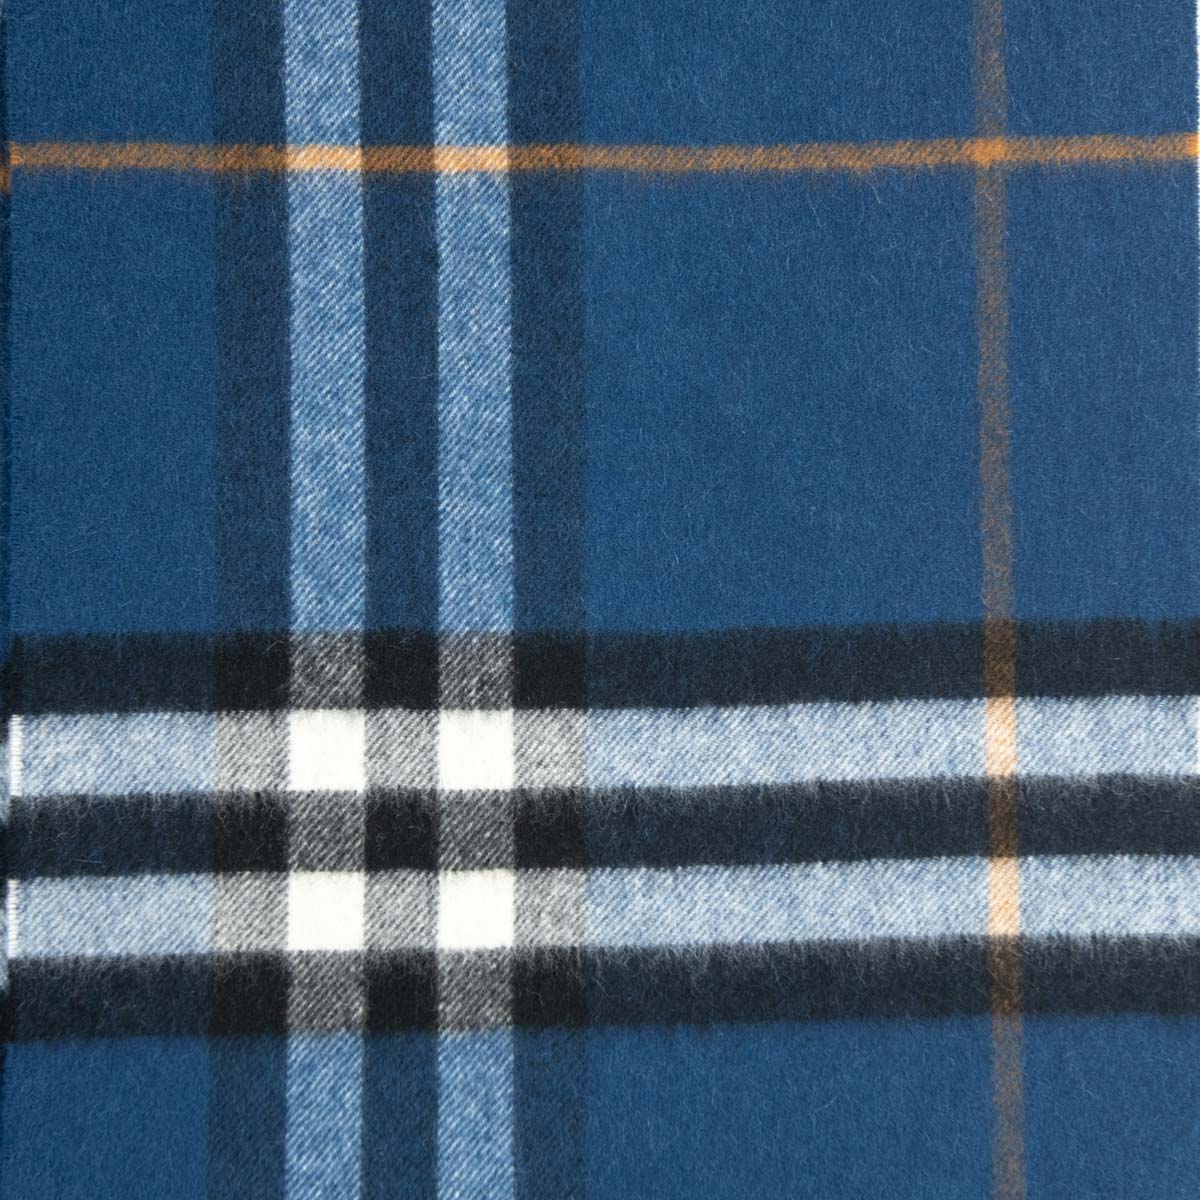 Burberry Blue Cashmere Giant Check Scarf - Love that Bag etc - Preowned Authentic Designer Handbags & Preloved Fashions